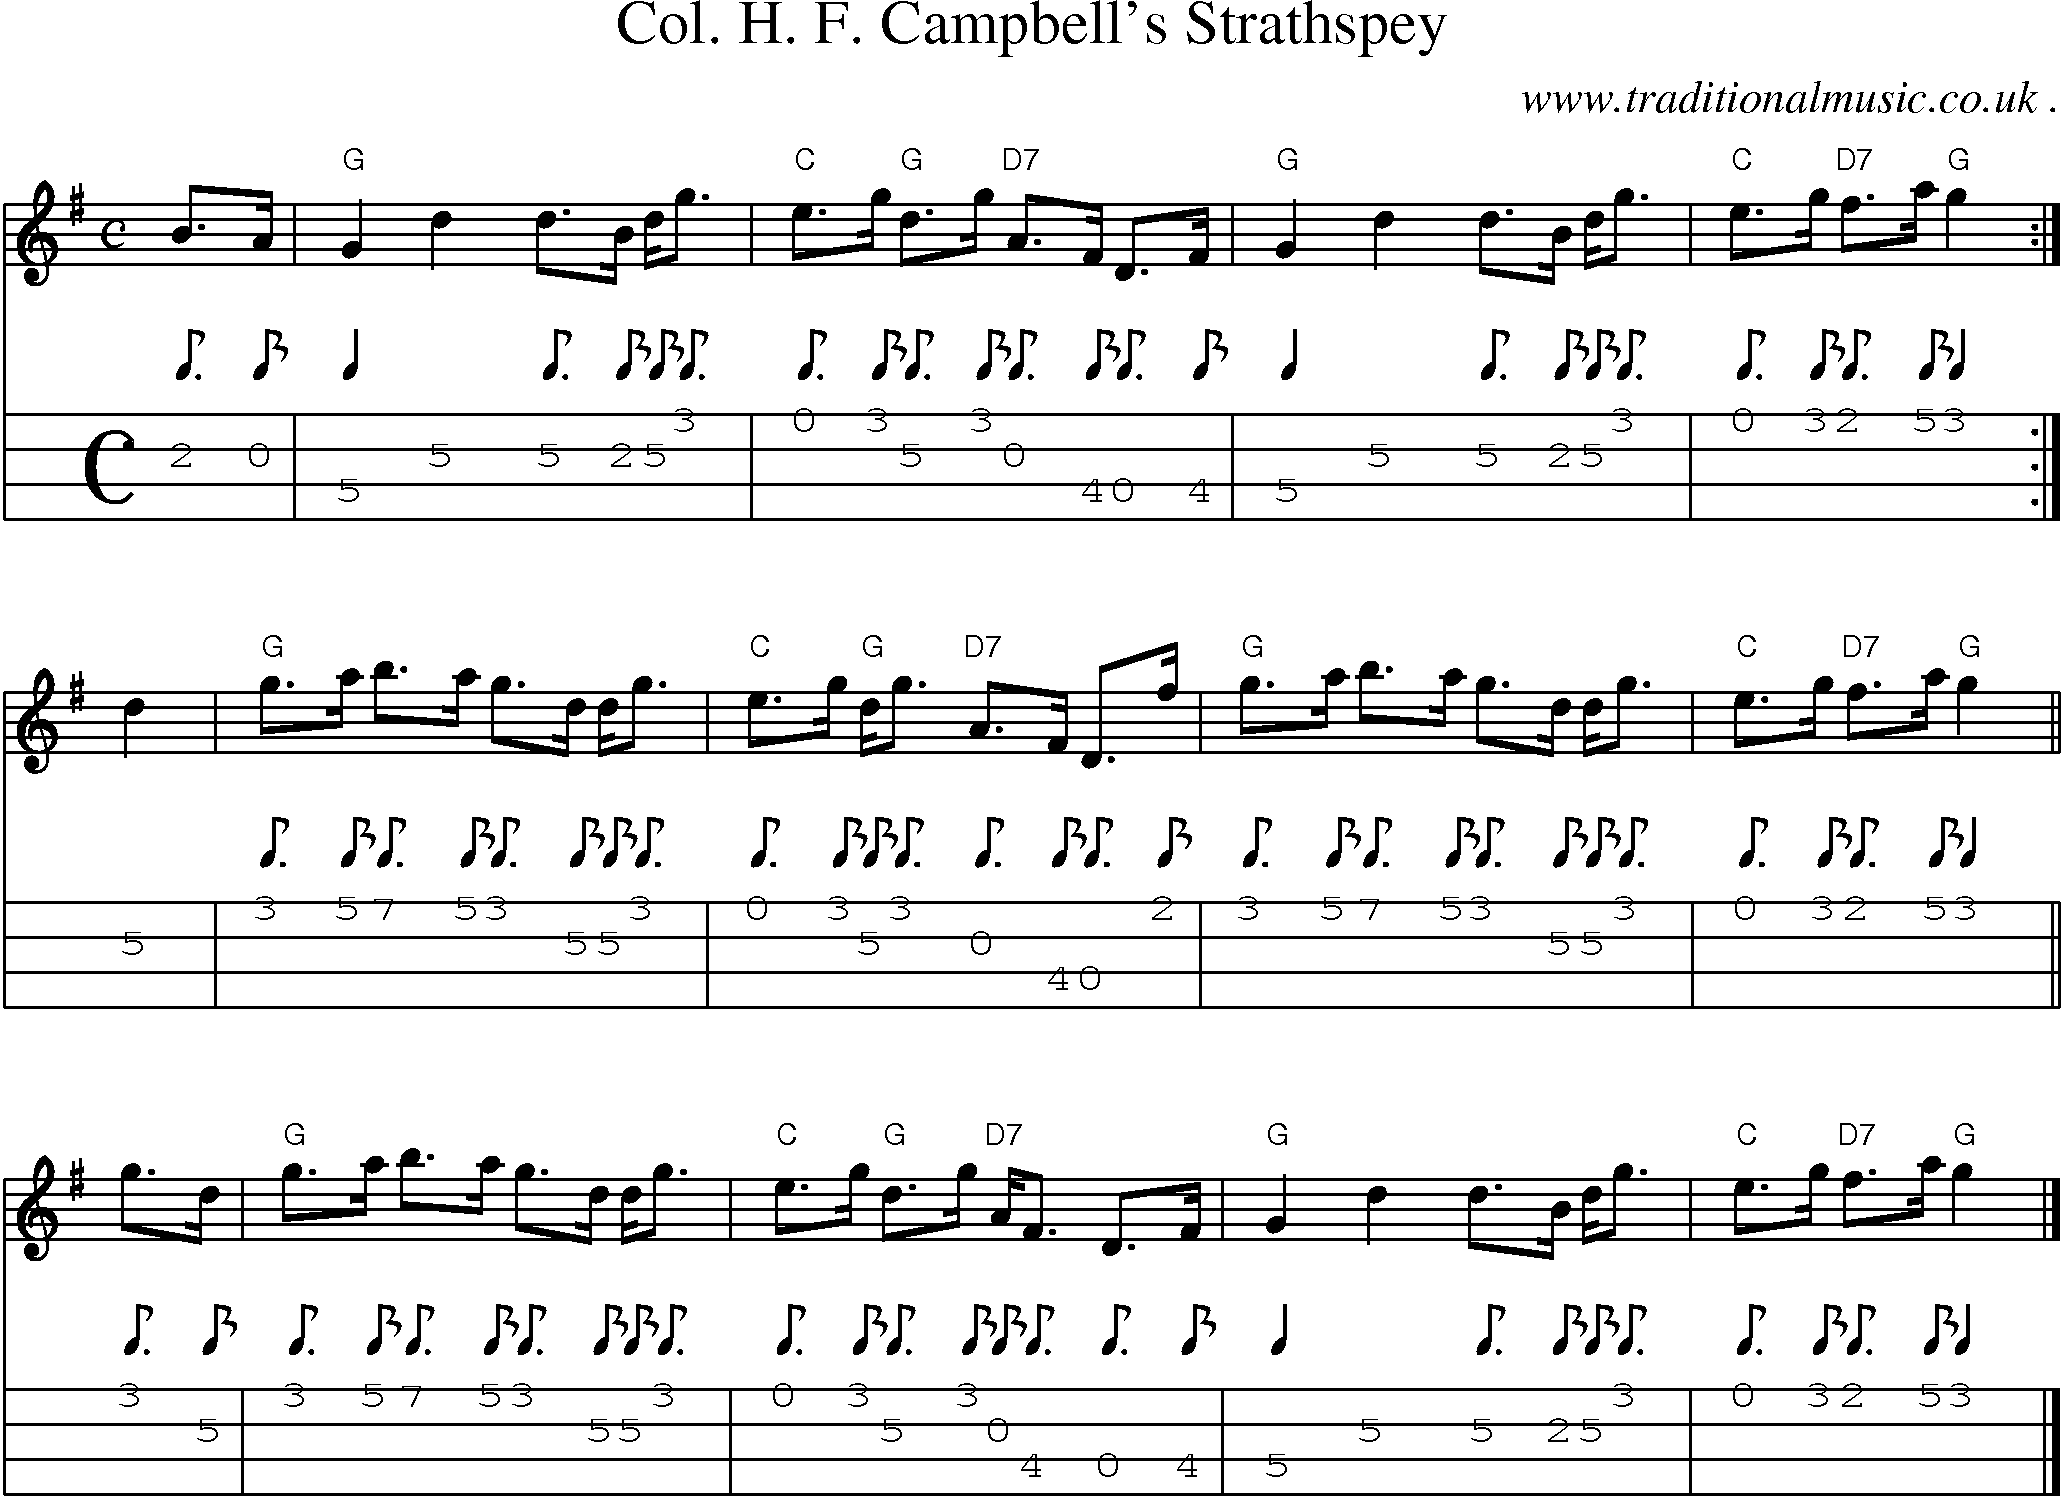 Sheet-music  score, Chords and Mandolin Tabs for Col H F Campbells Strathspey